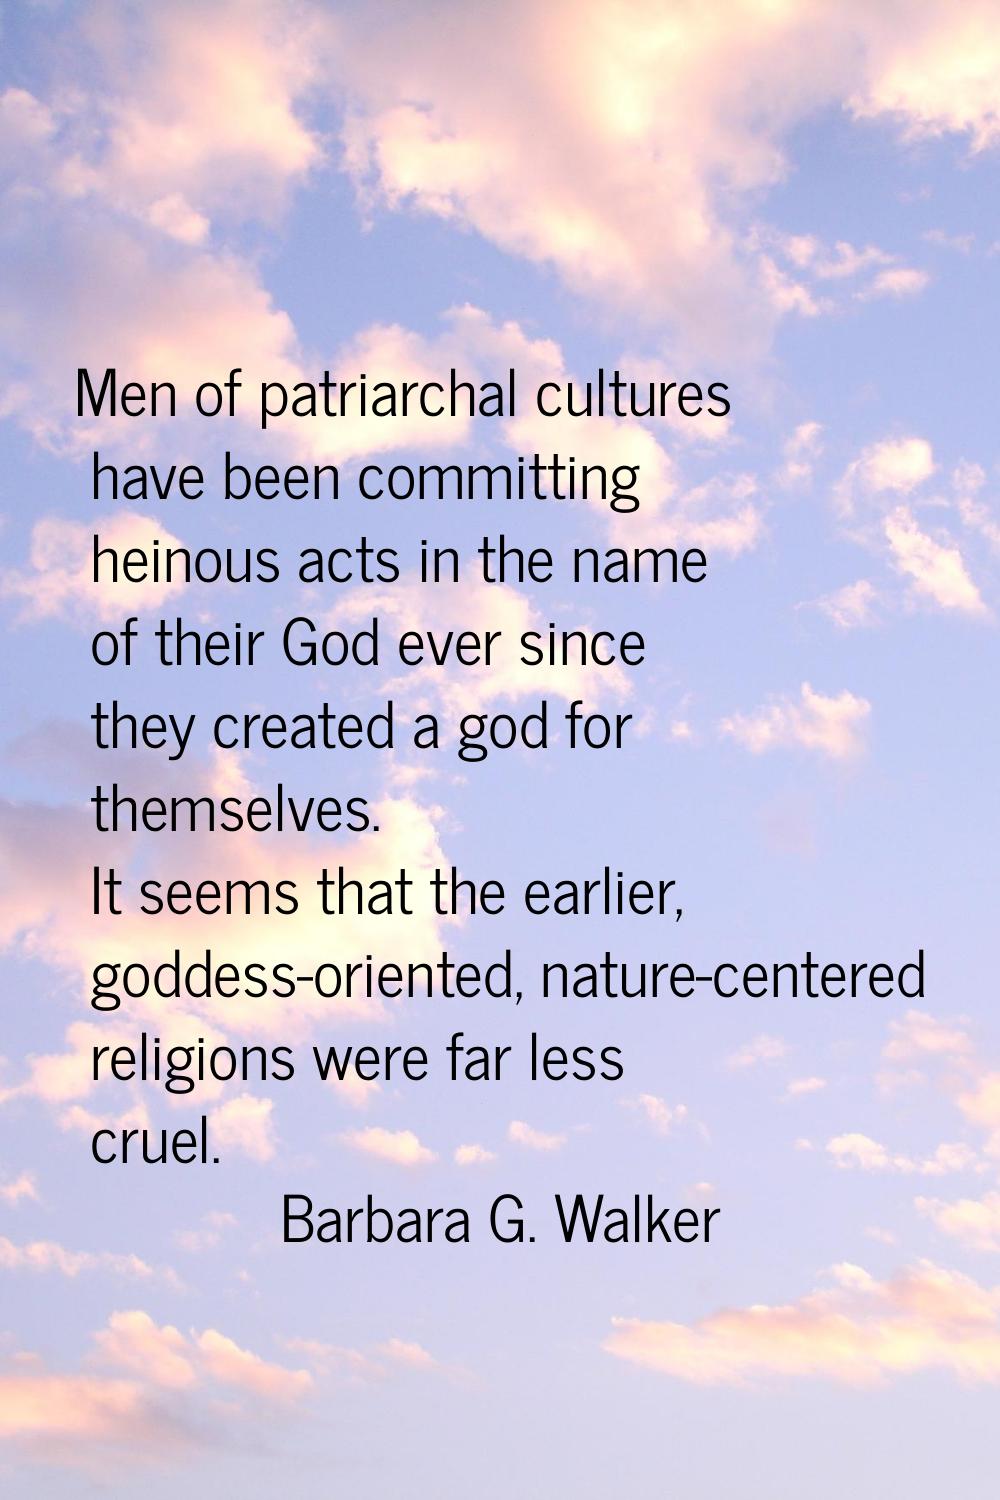 Men of patriarchal cultures have been committing heinous acts in the name of their God ever since t